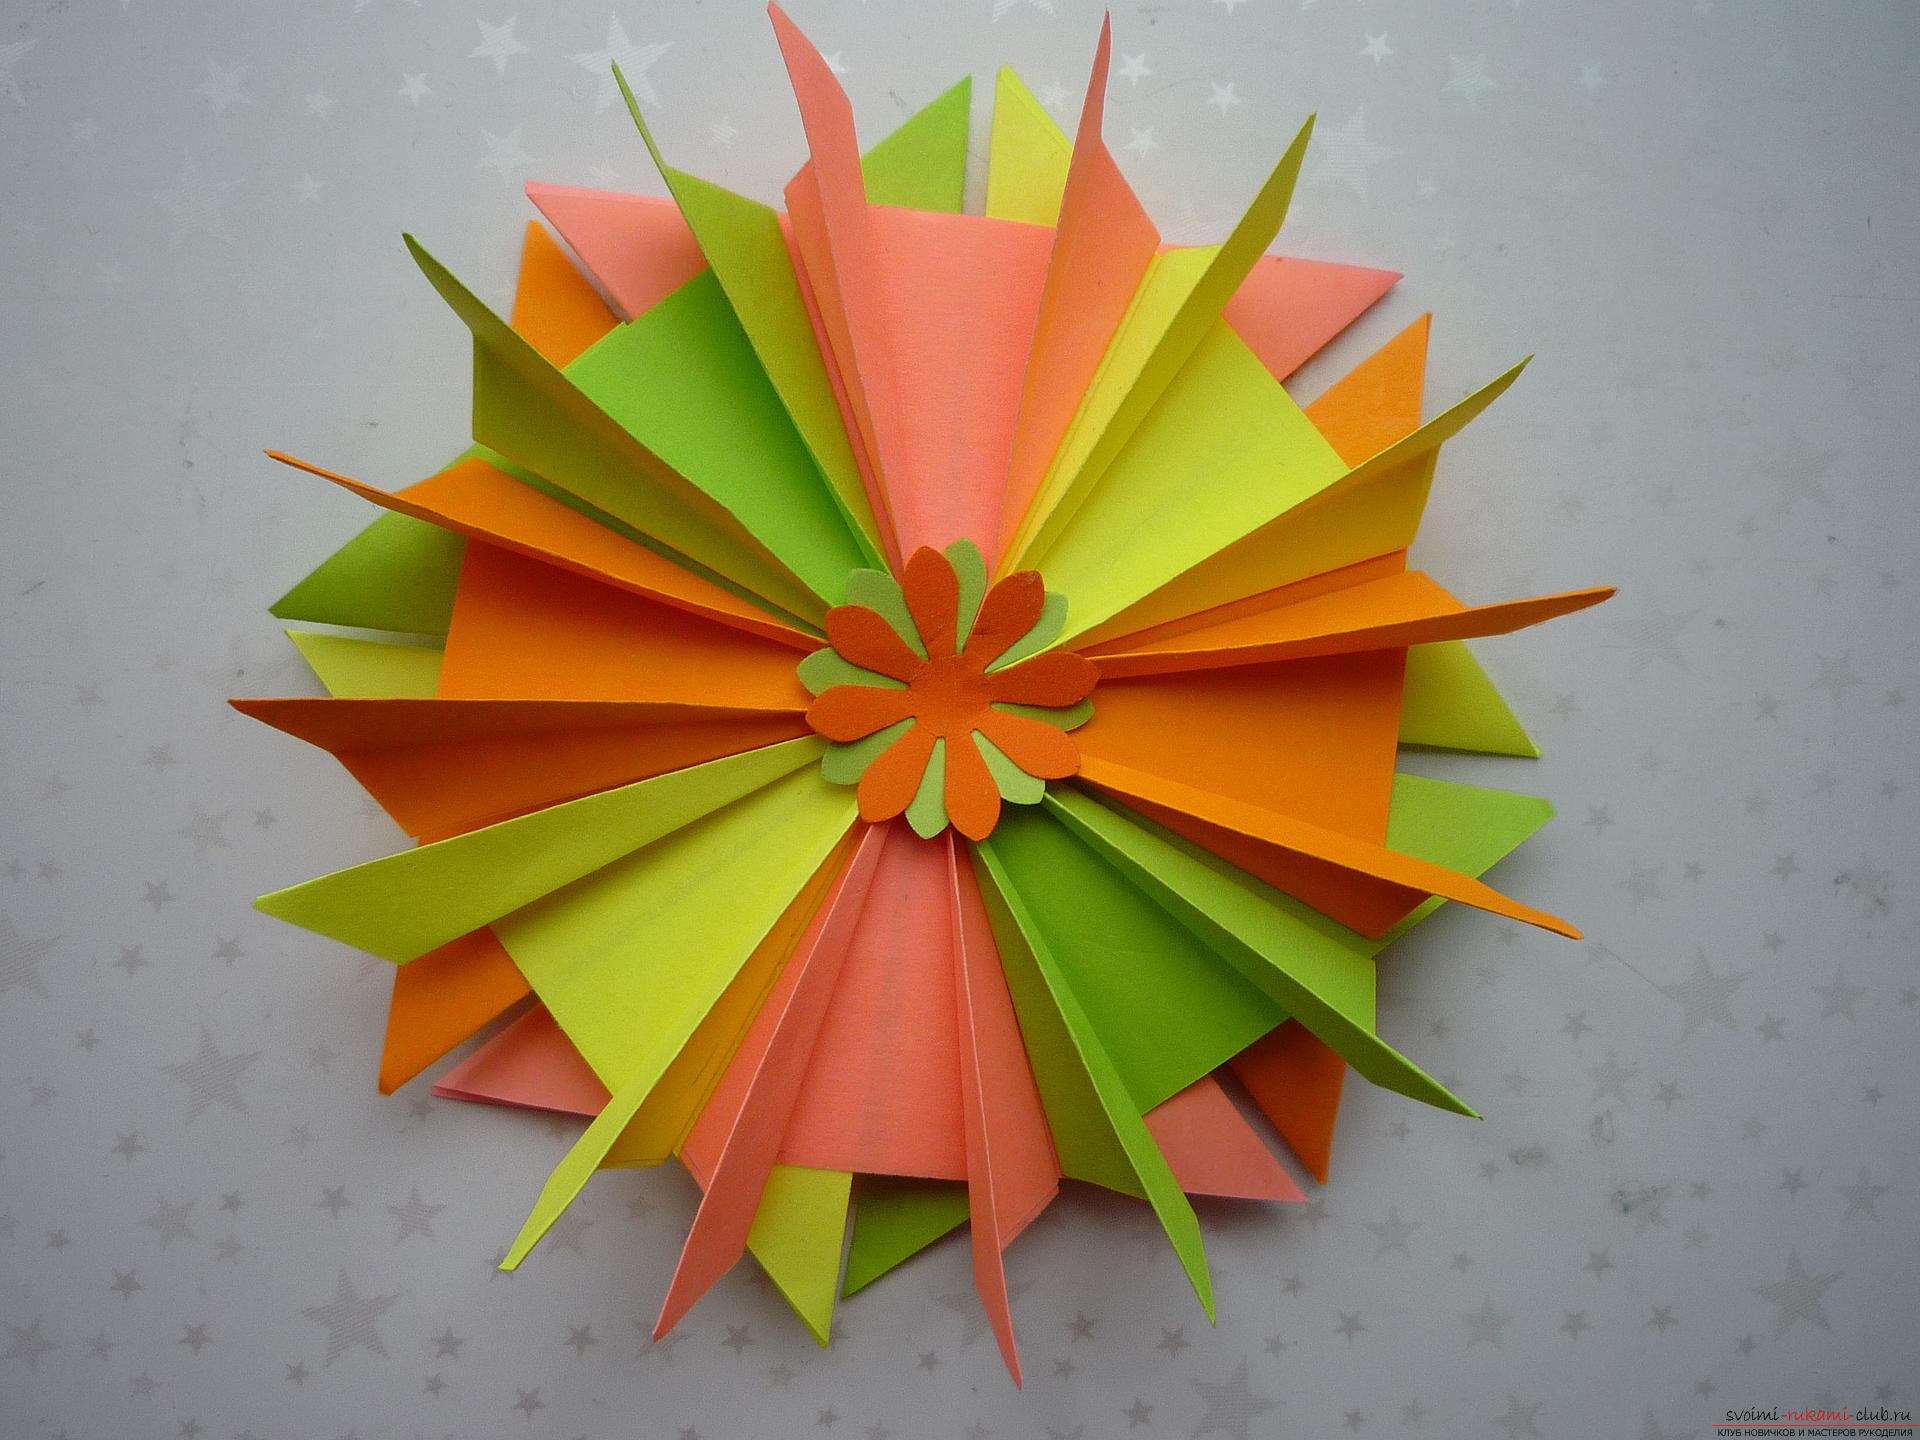 The master class will tell you how to make a modular origami star out of paper with your own hands. Photo number 12